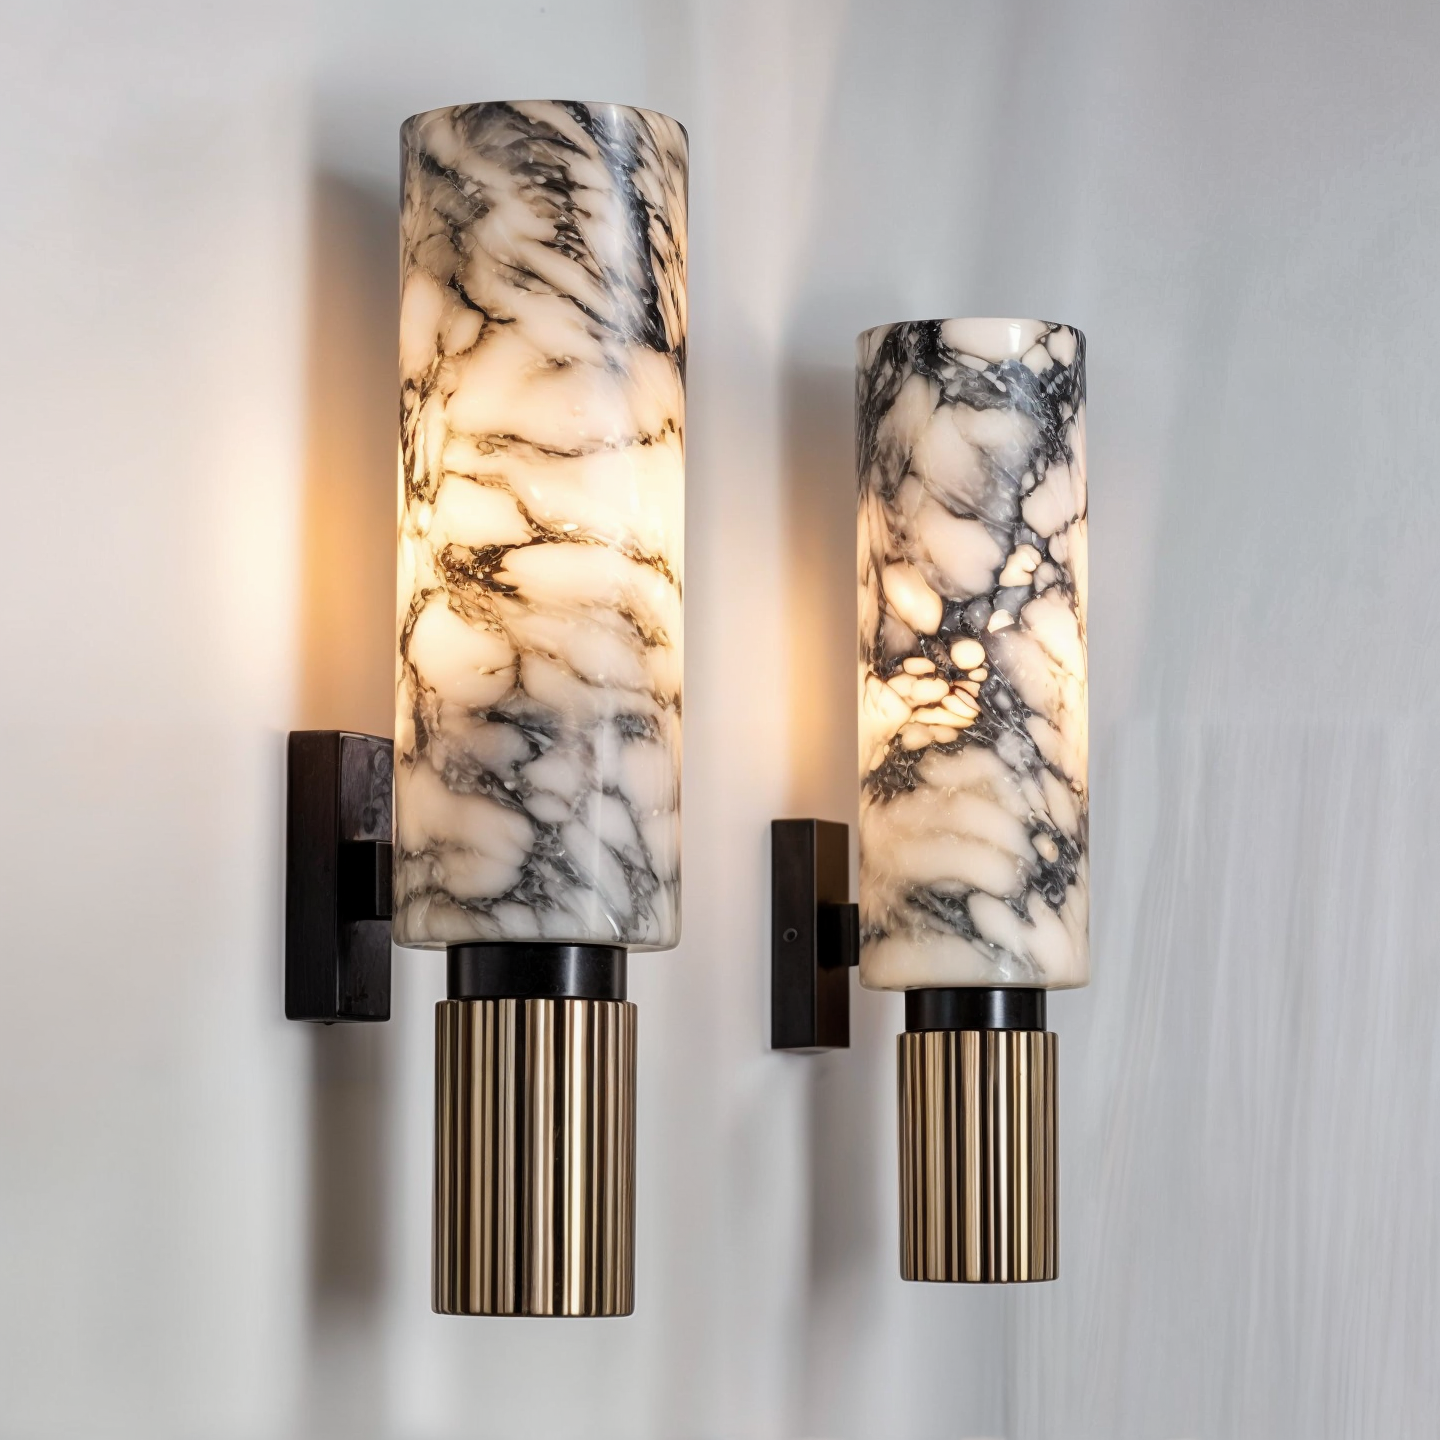 The Mabbie Marble Lamp